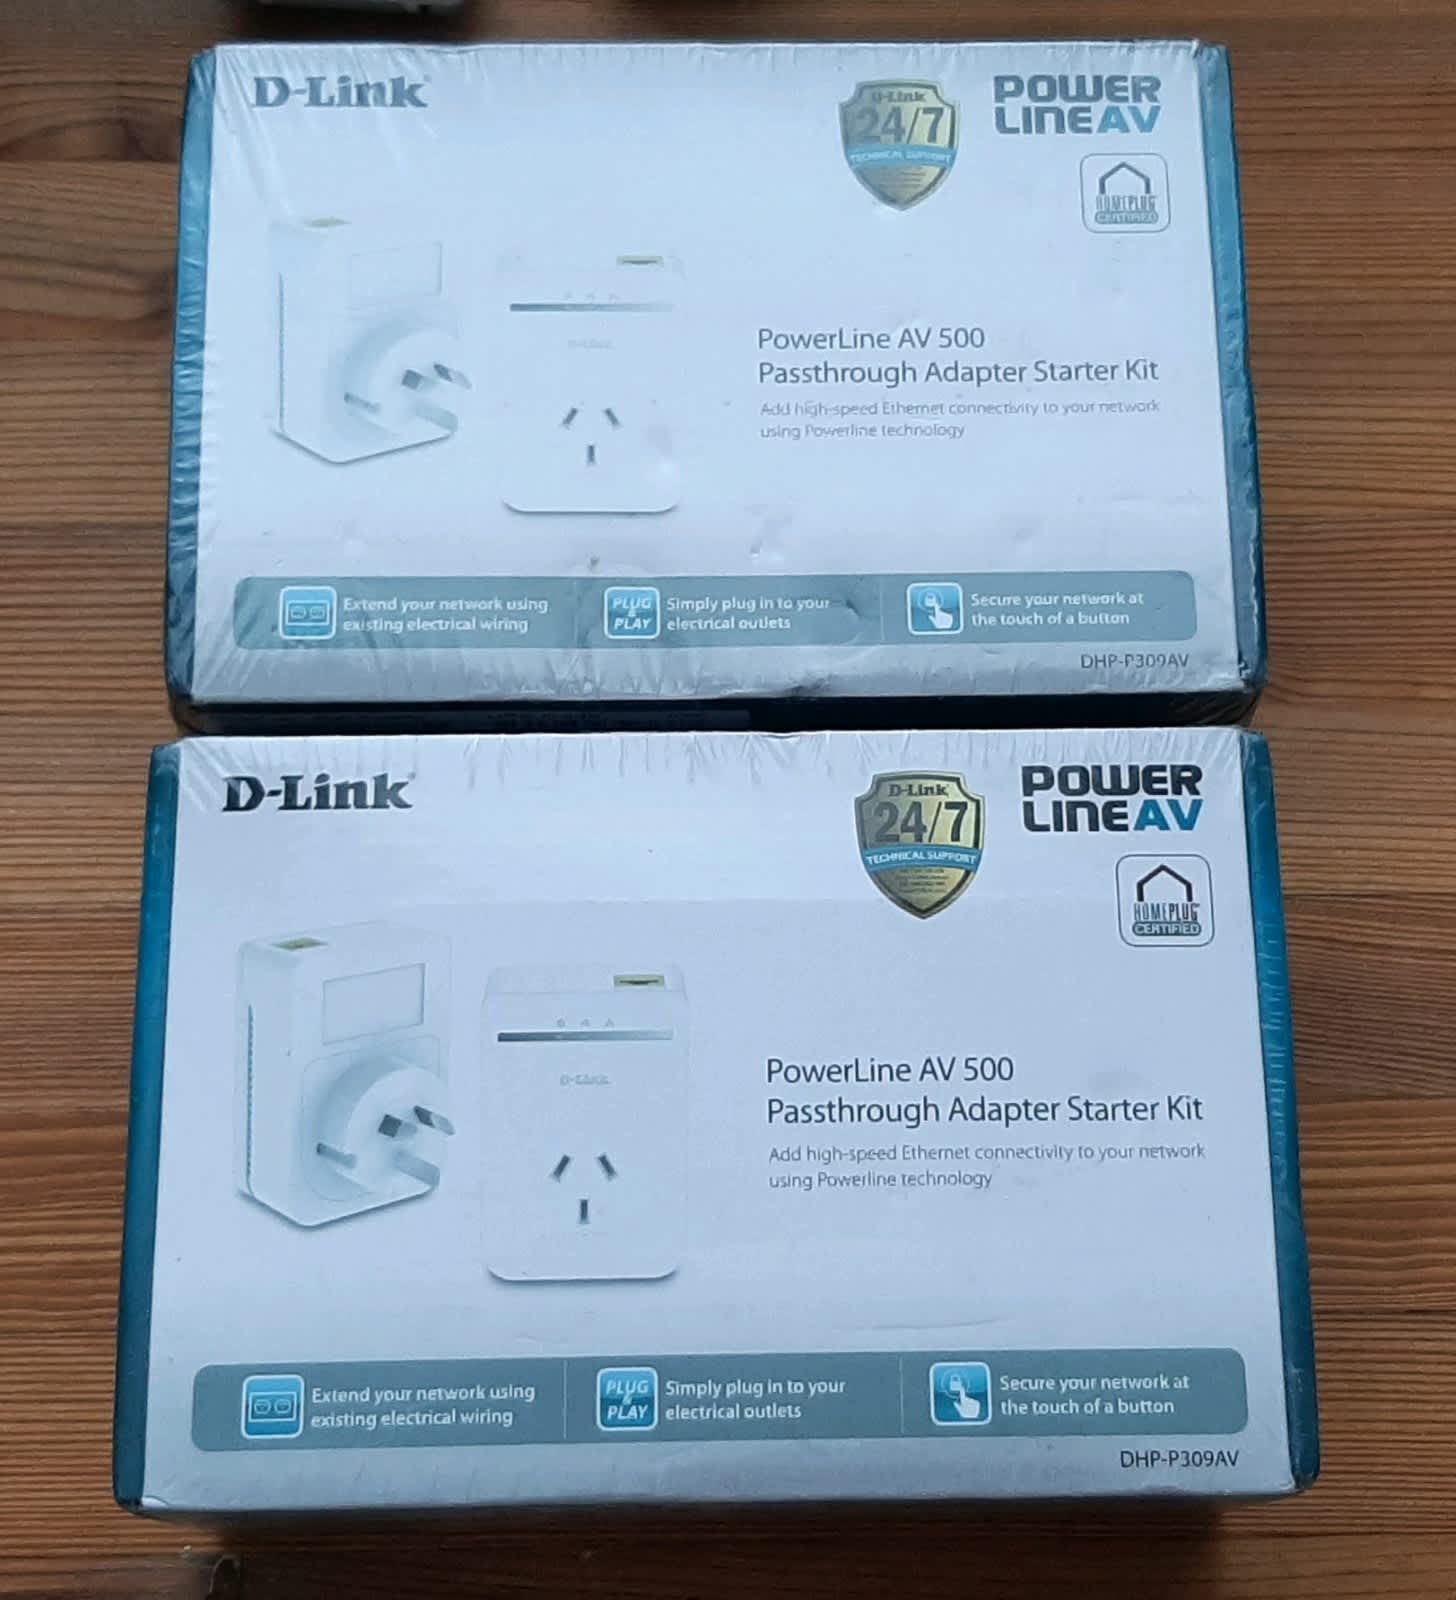 INIU 22.5W Power Bank 10000mAh Slim USB C Portable Charger Fast Charge, Other Electronics & Computers, Gumtree Australia Gosford Area - Wyoming